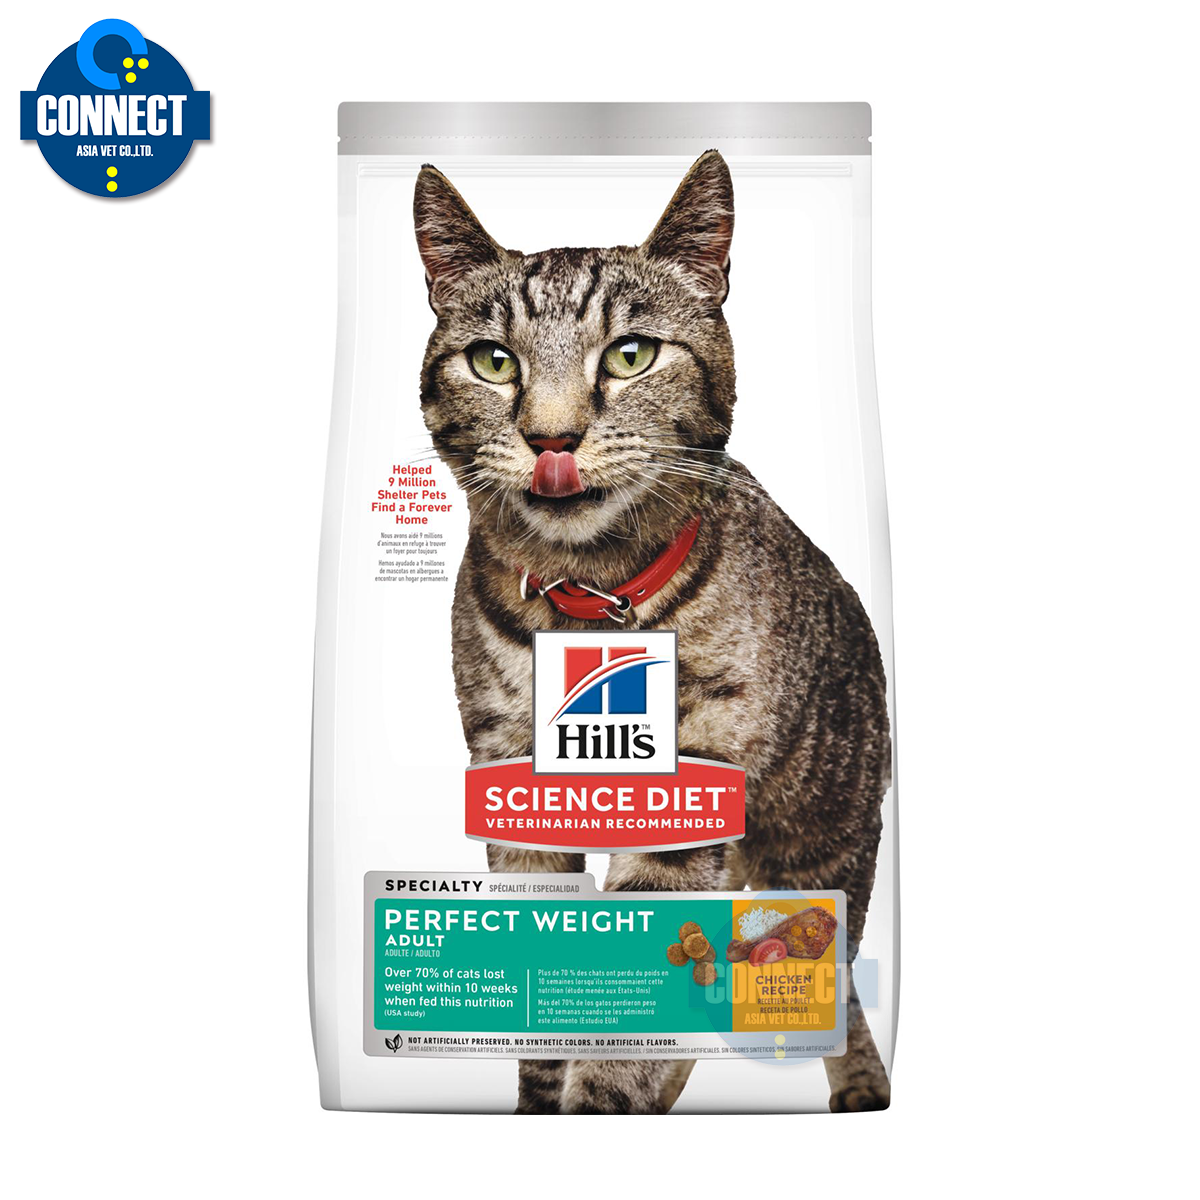 Hill's® Science Diet® Adult Perfect Weight cat food - ขนาด 1.4 กิโลกรัม